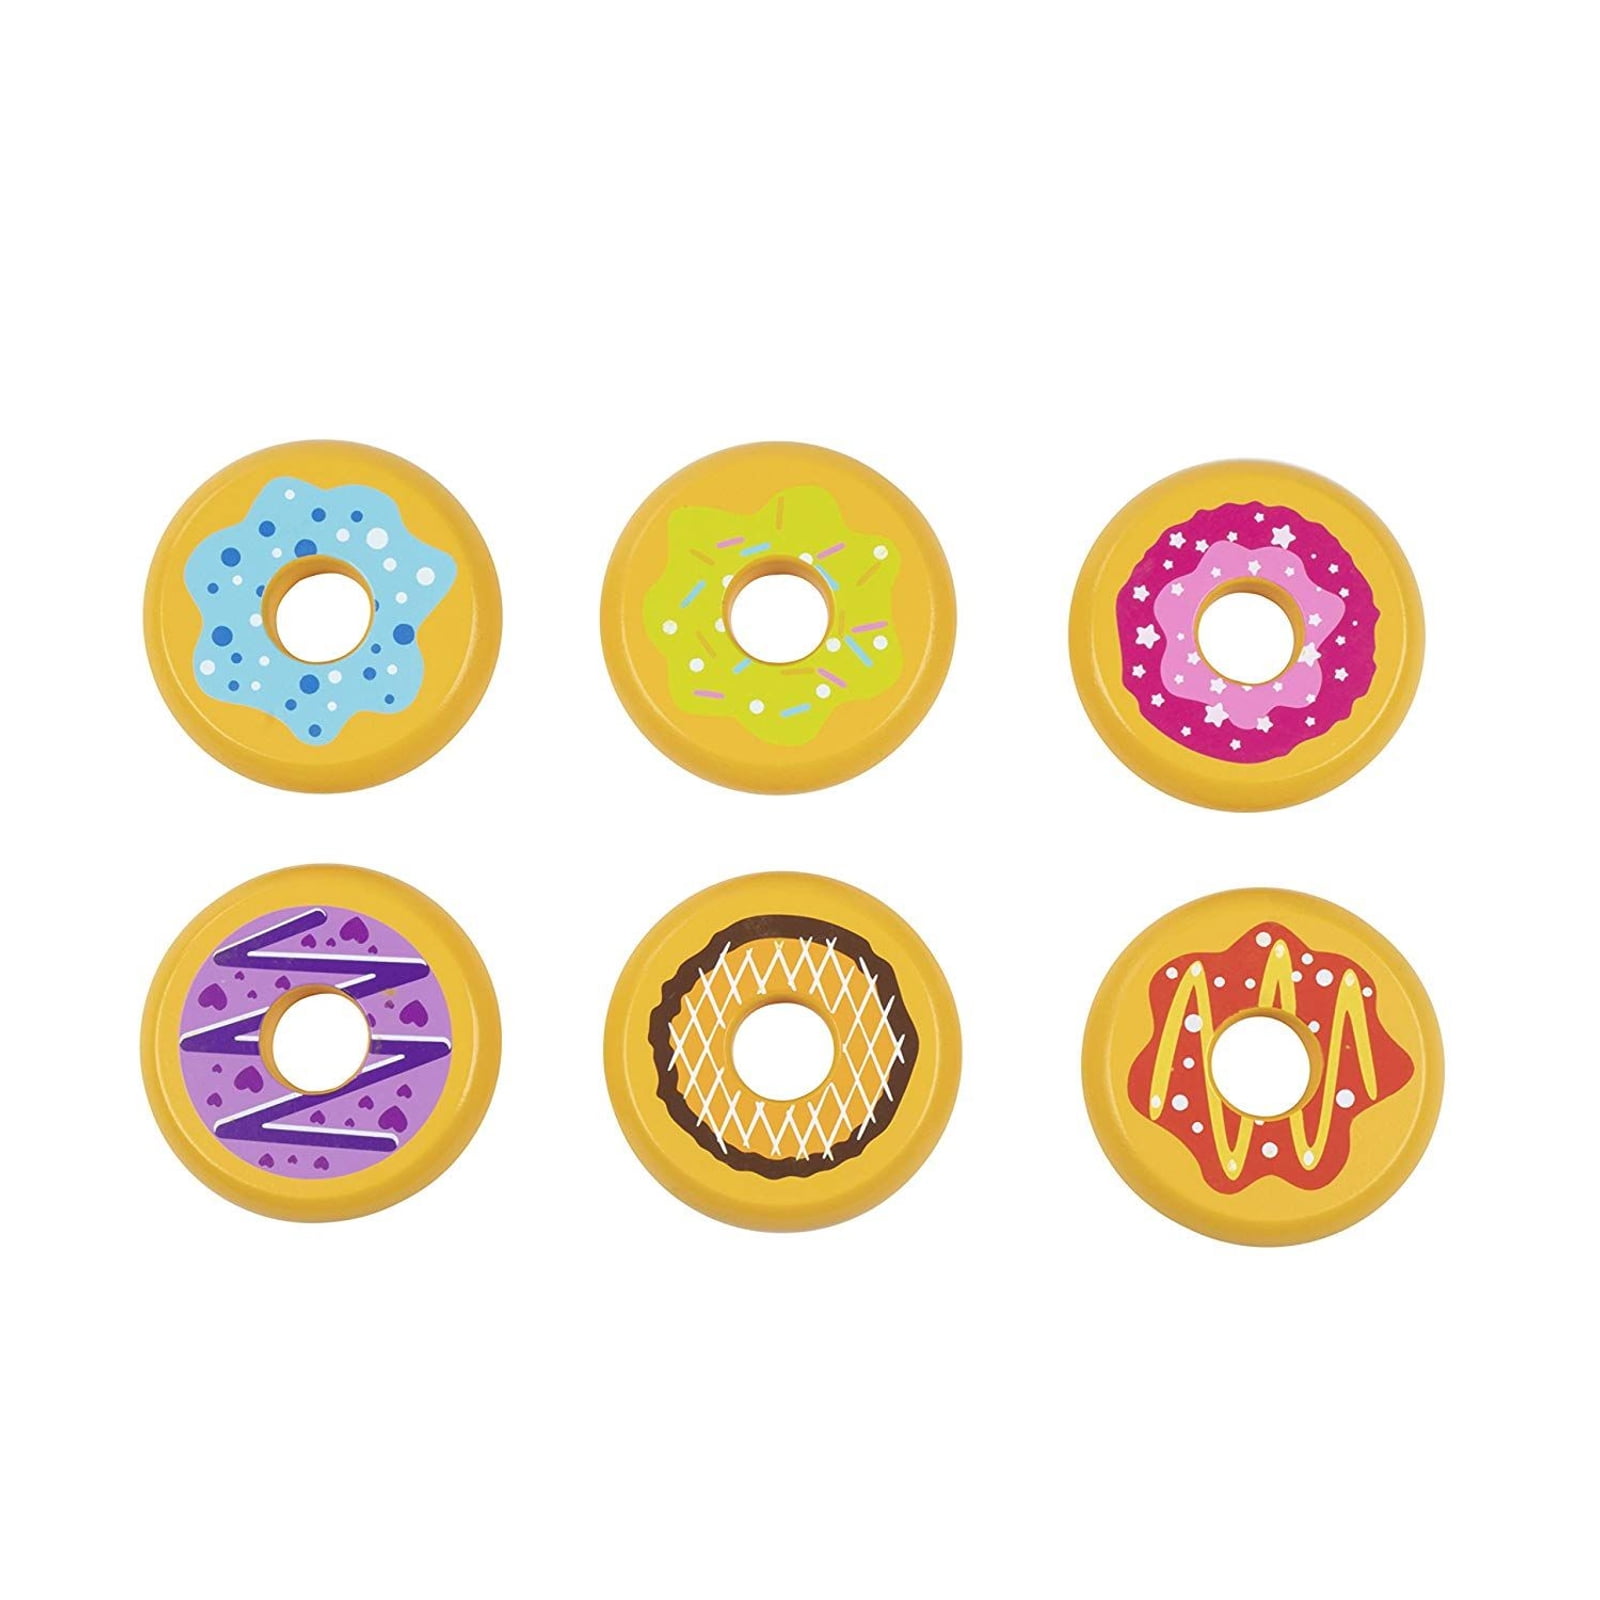 Details about   Play Food DONUT DOUGHNUT Pretend Fun Sweets Snack Treat For Tikes Kitchen PF 